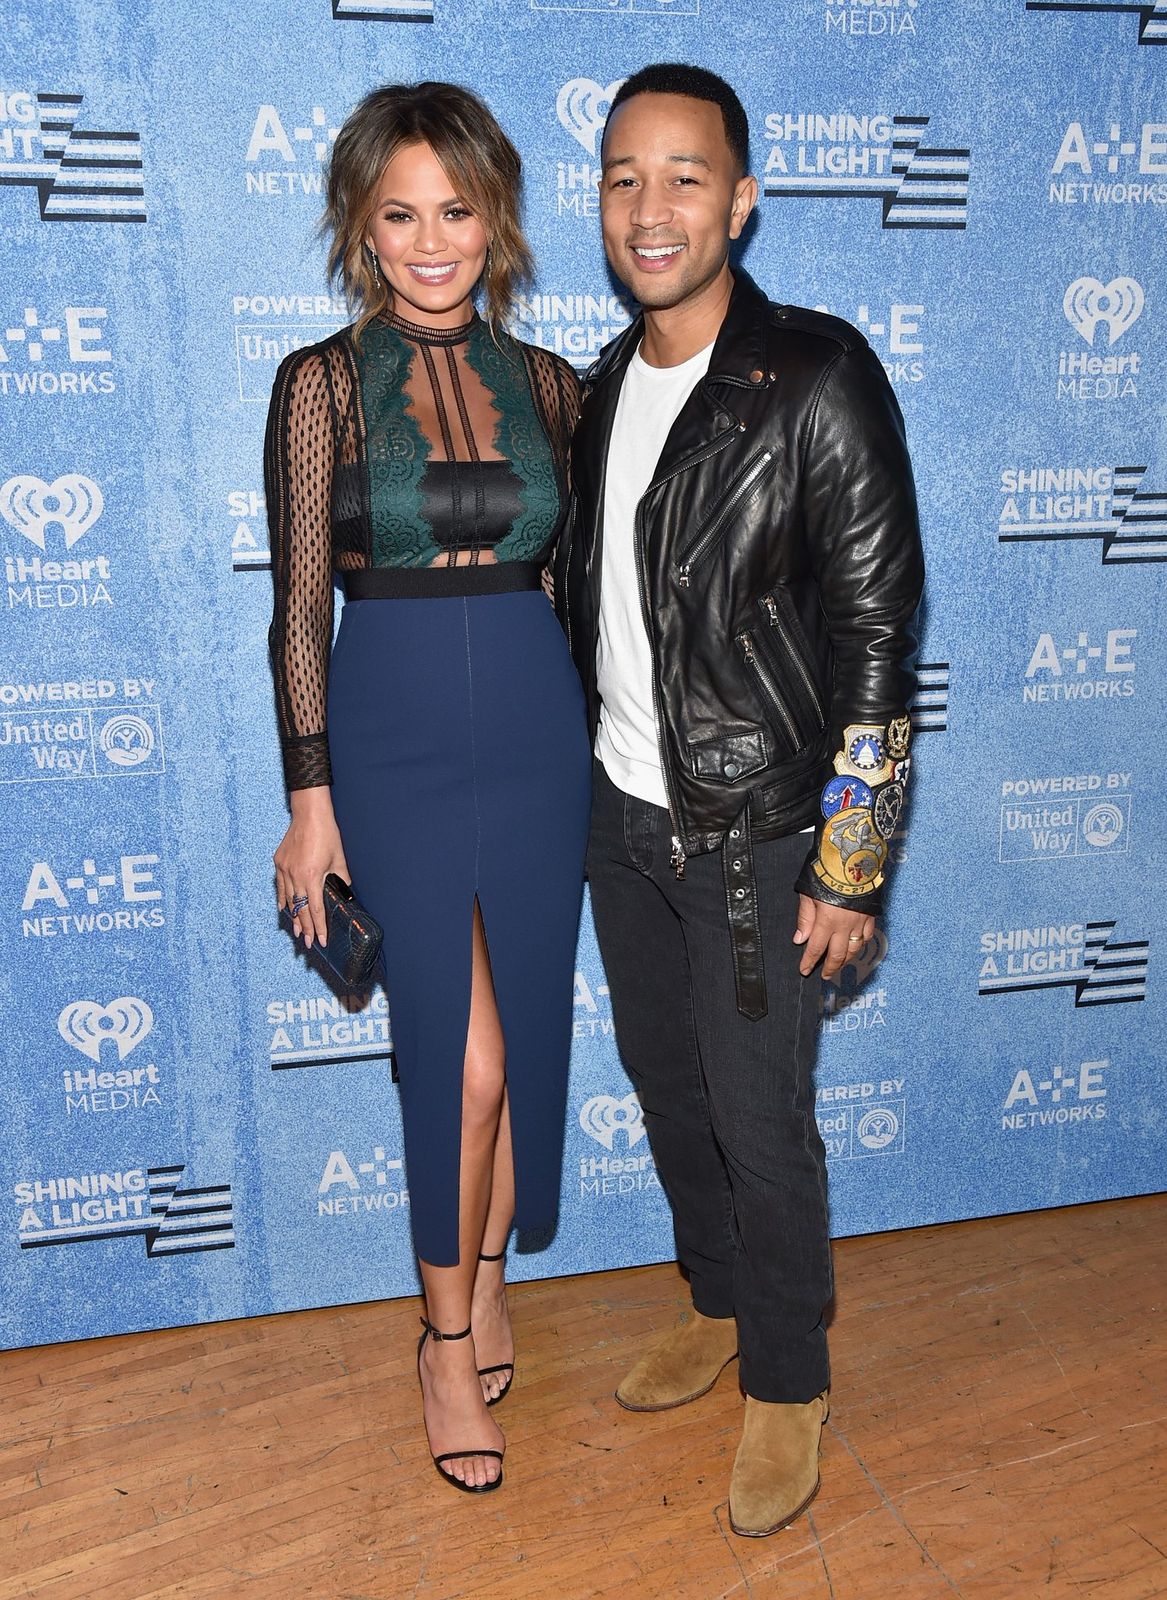 Chrissy Teigen and John Legend at A+E Networks "Shining A Light" concert on November 18, 2015, in Los Angeles, California | Photo: Mike Windle/A+E Networks/Getty Images